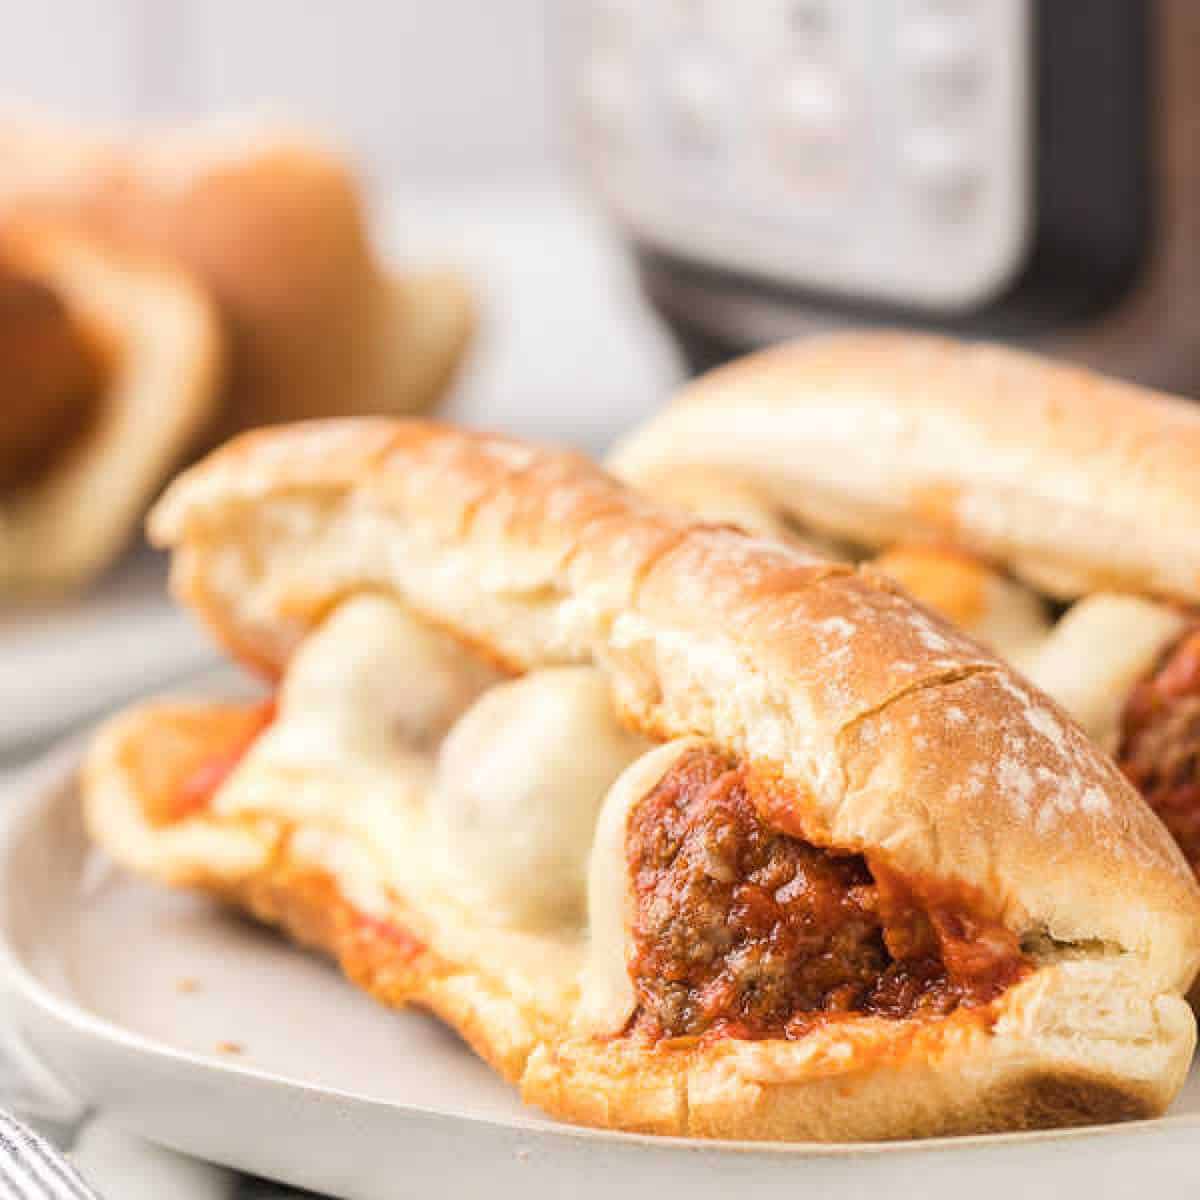 Meatball subs topped with melted cheese on a plate